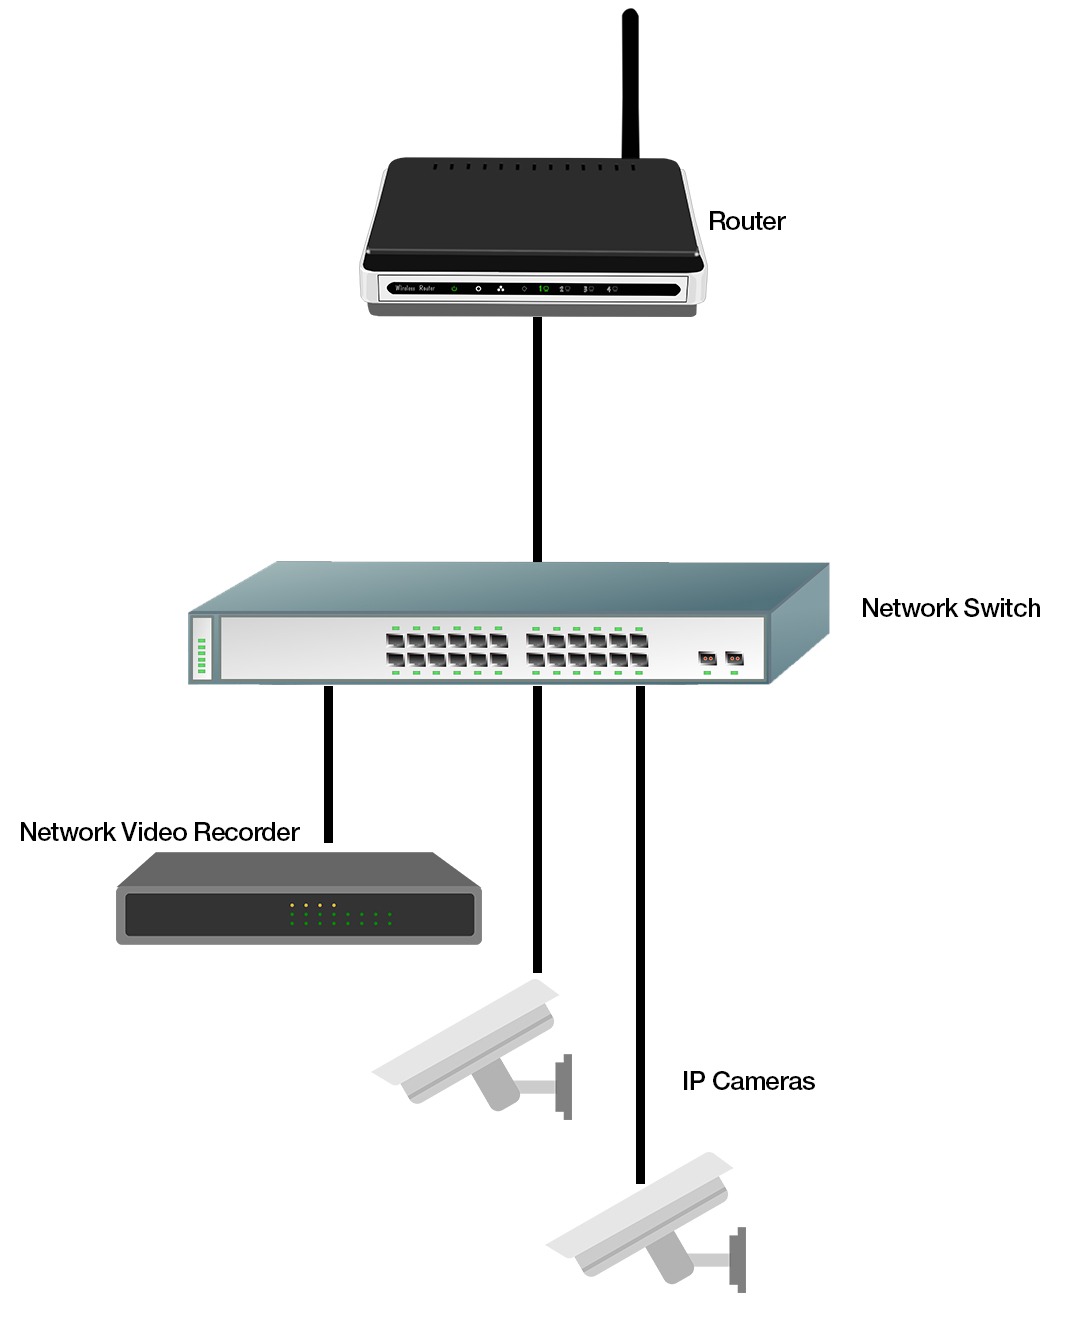 Diagram illustrating what components are used in the installation of IP cameras